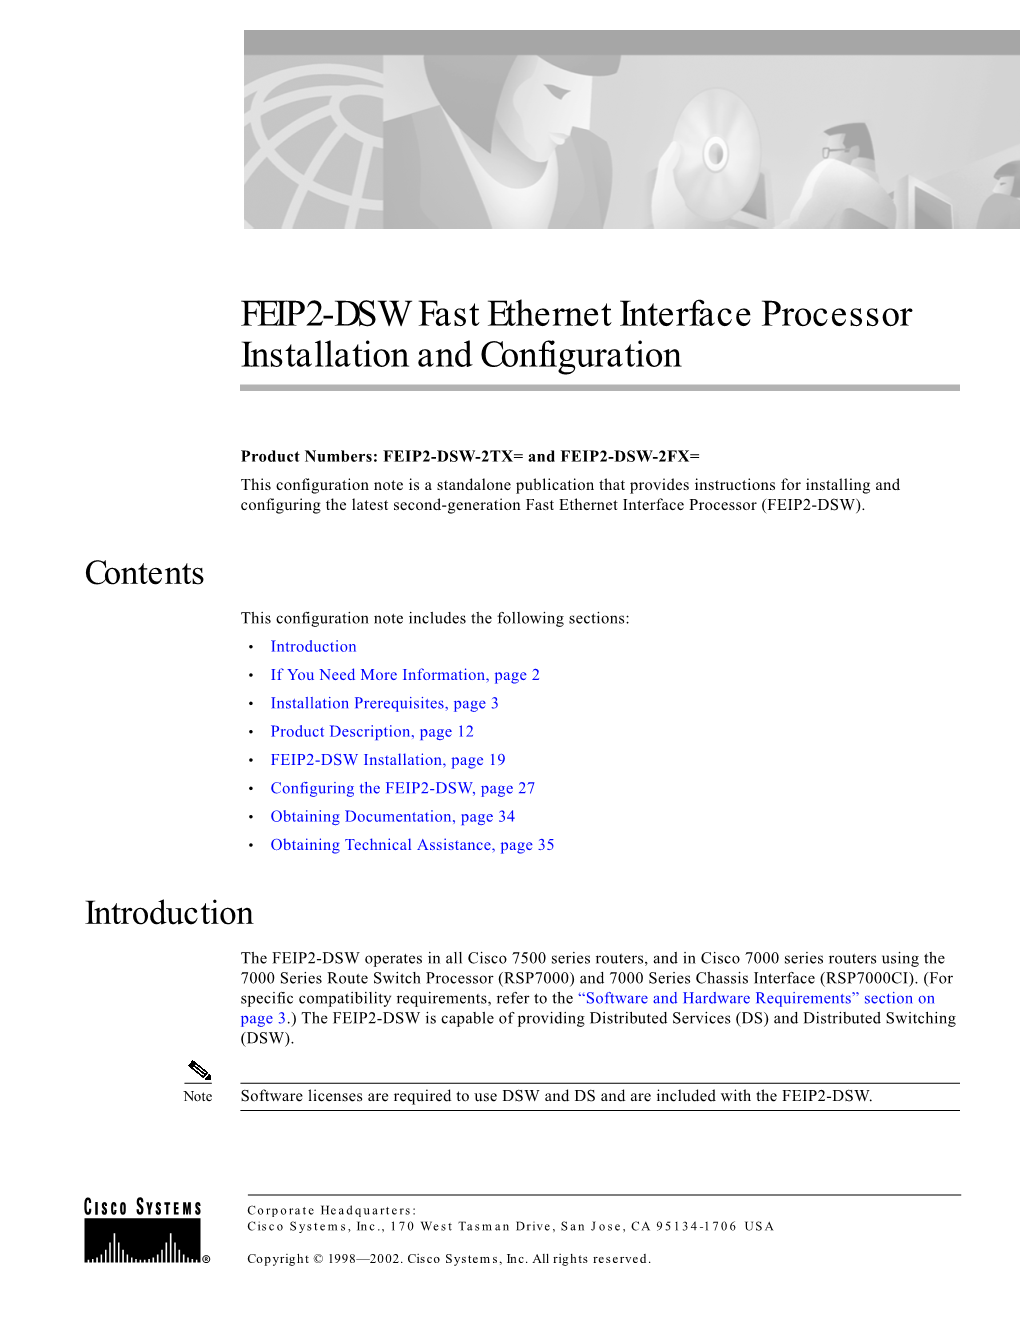 FEIP2-DSW Fast Ethernet Interface Processor Installation and Configuration